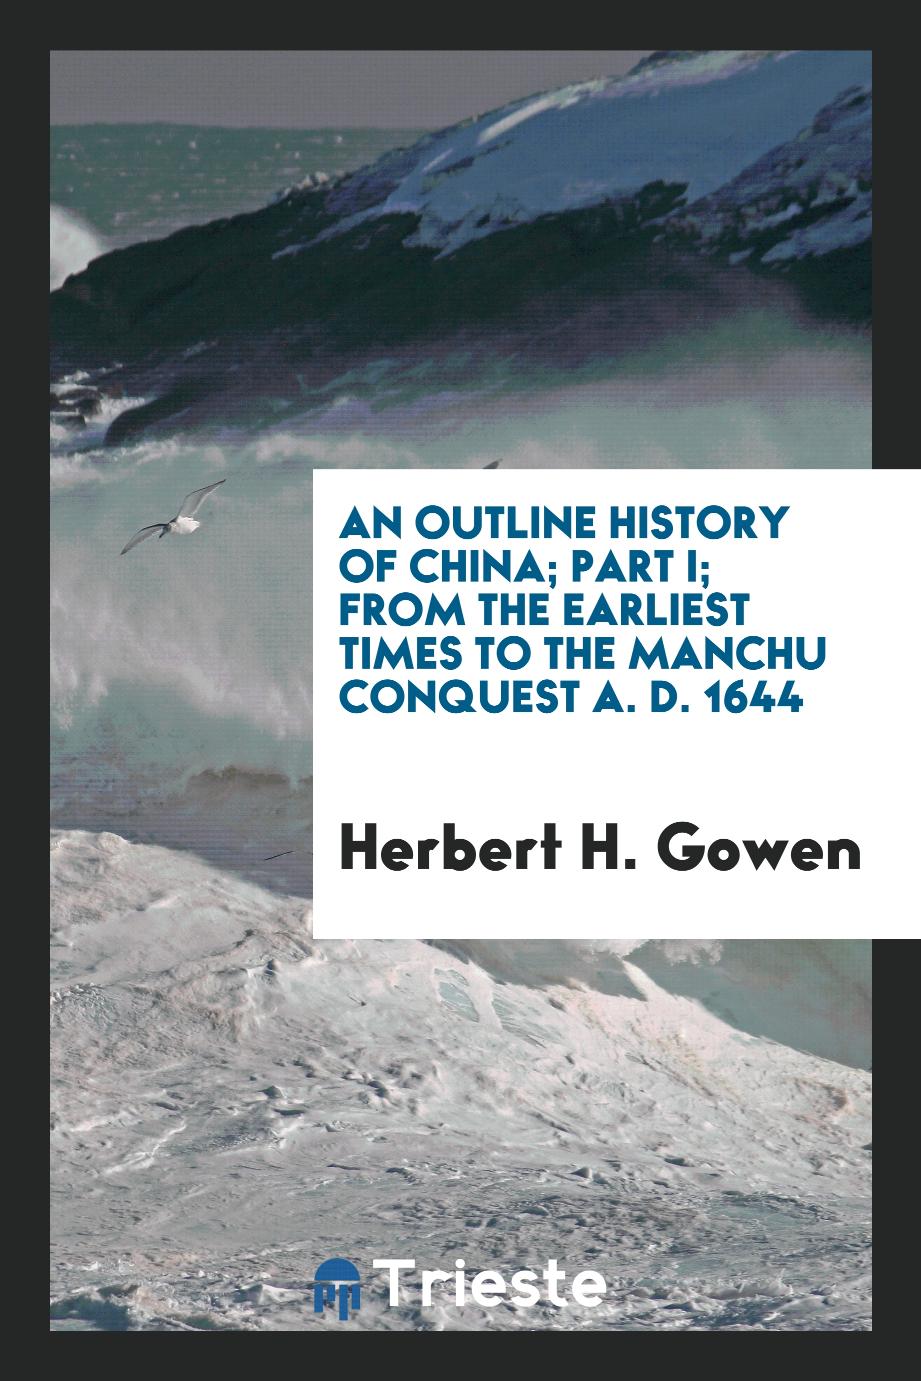 An outline history of China; Part I; From the earliest times to the manchu conquest A. D. 1644